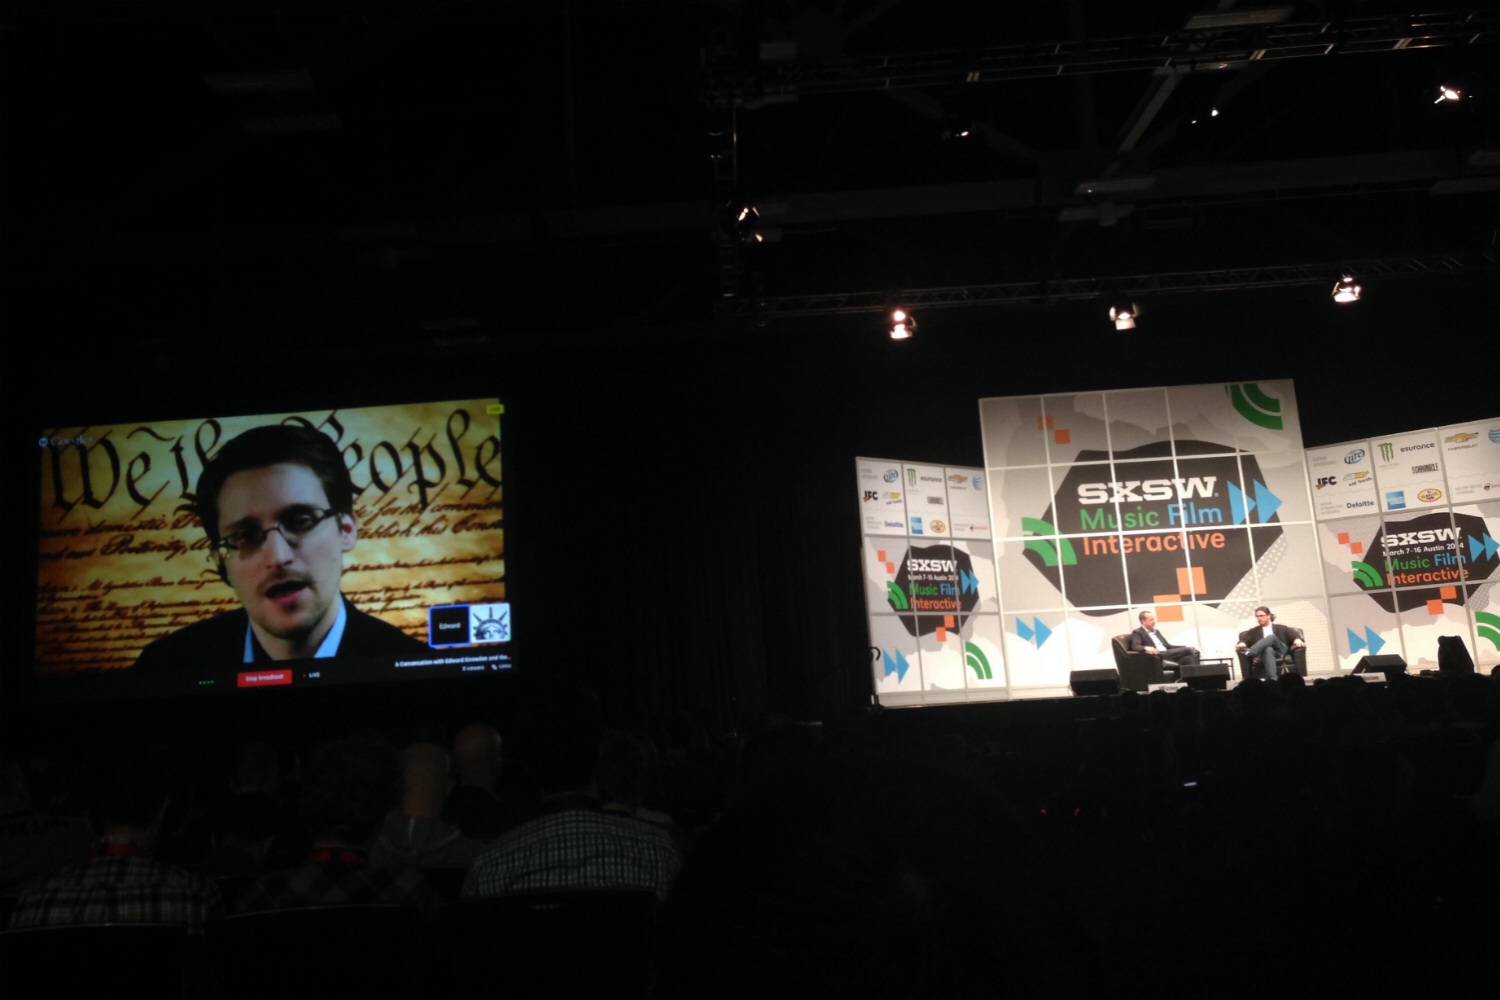 Edward Snowden speaks via video conference from Russia at SXSW Interactive in Austin, Tex. on March 10, 2014 (Harry McCracken / TIME)